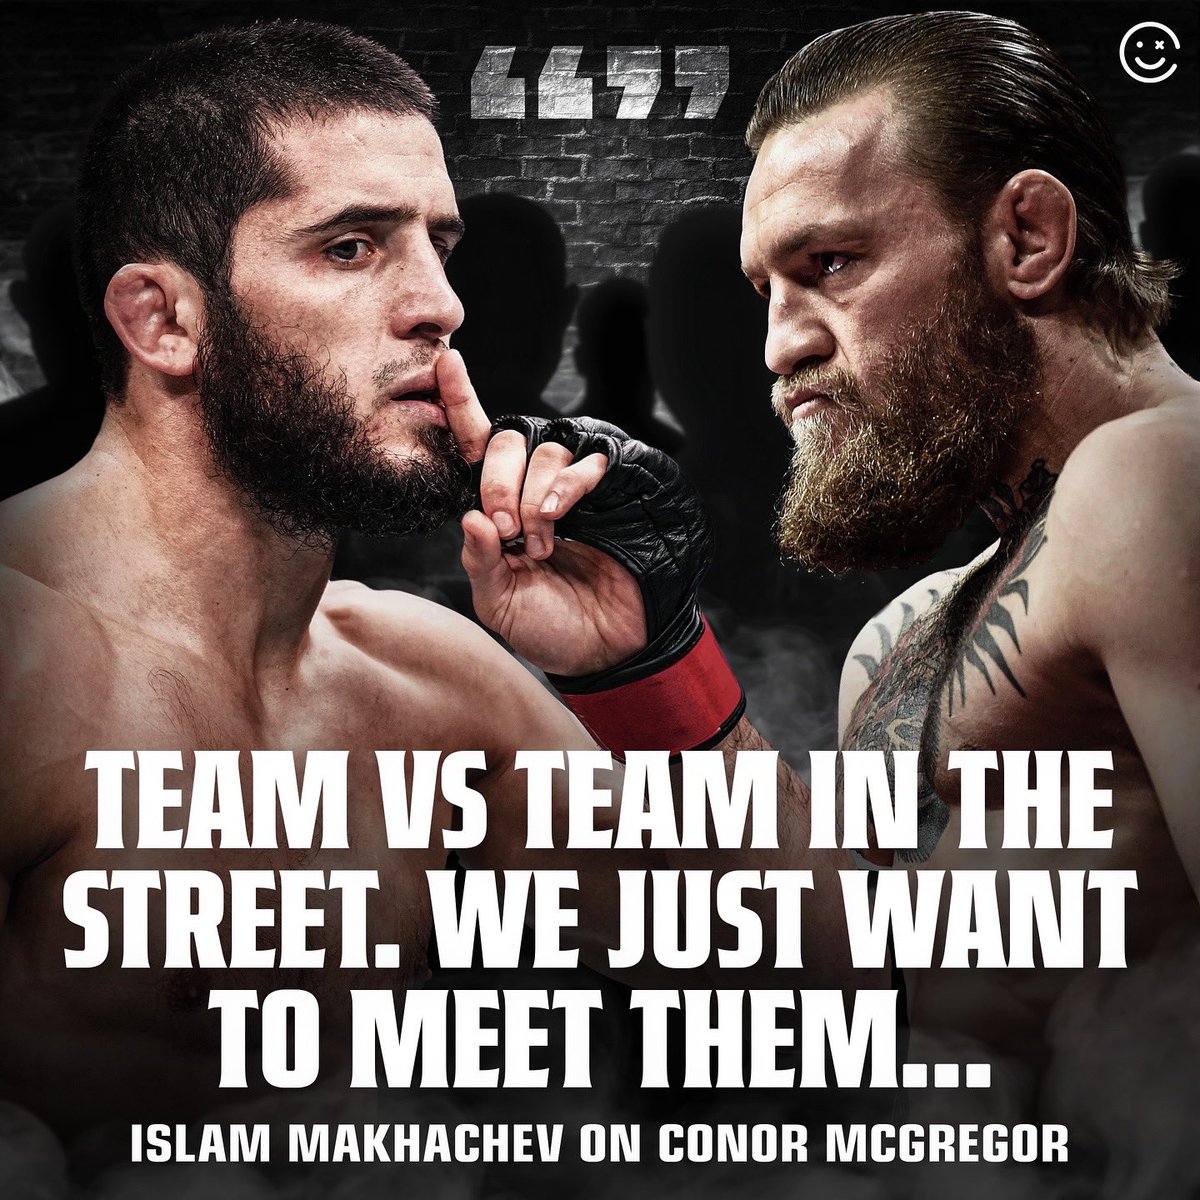 Islam Makhachev wants a Team vs Team street fight with Conor McGregor 😳